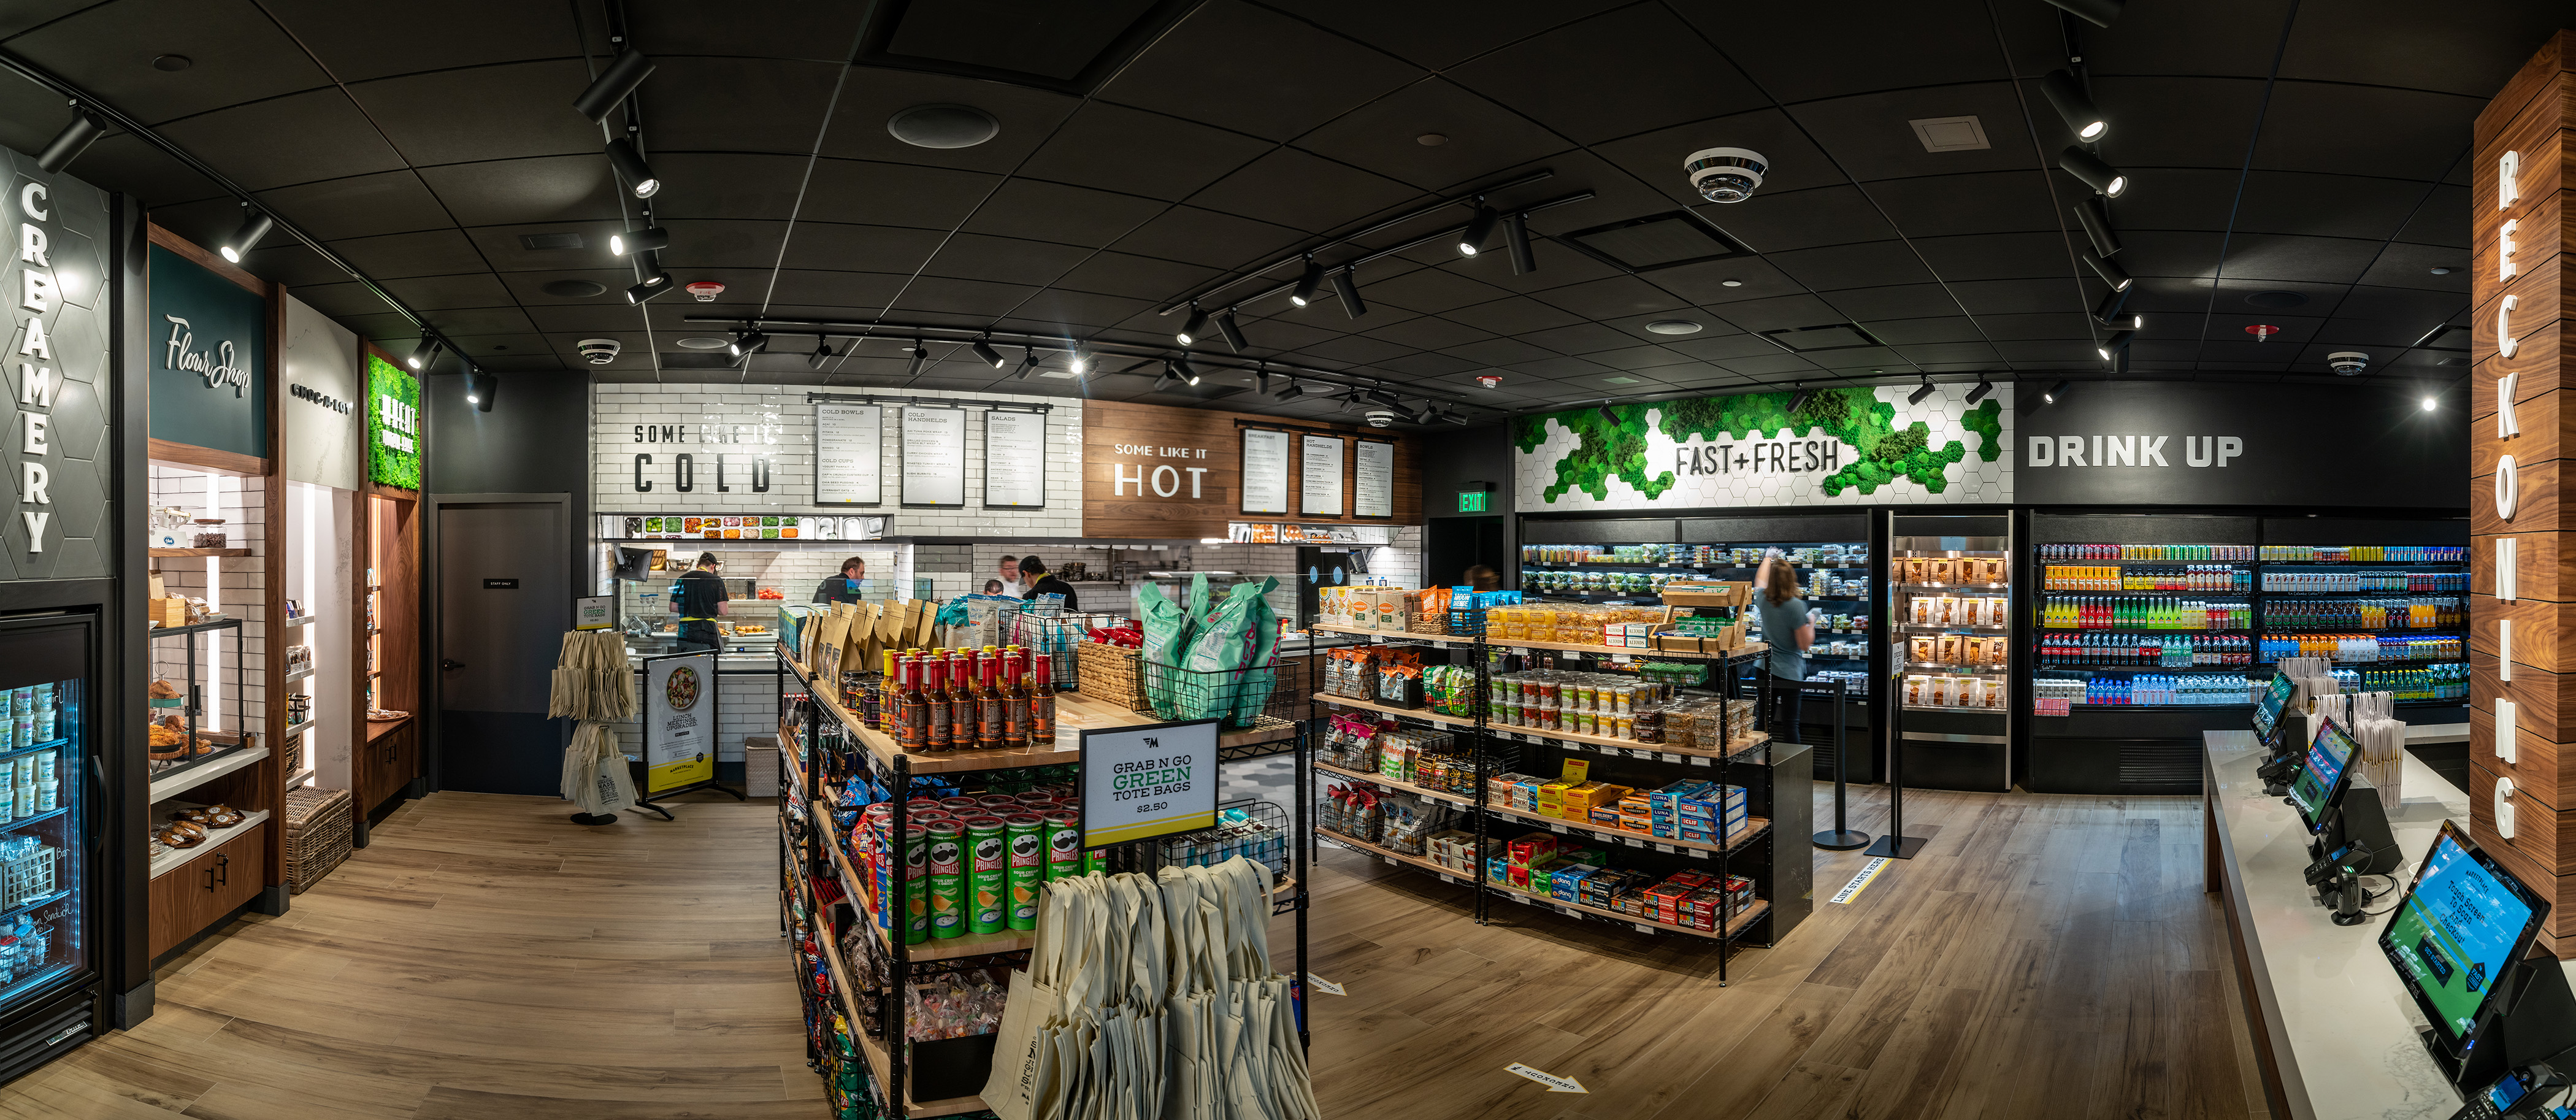 Marketplace, an Urban Eatery offers fresh and locally sourced, made-to-order and grab ‘n’ go meals. Photo courtesy of Marketplace, an Urban Eatery.